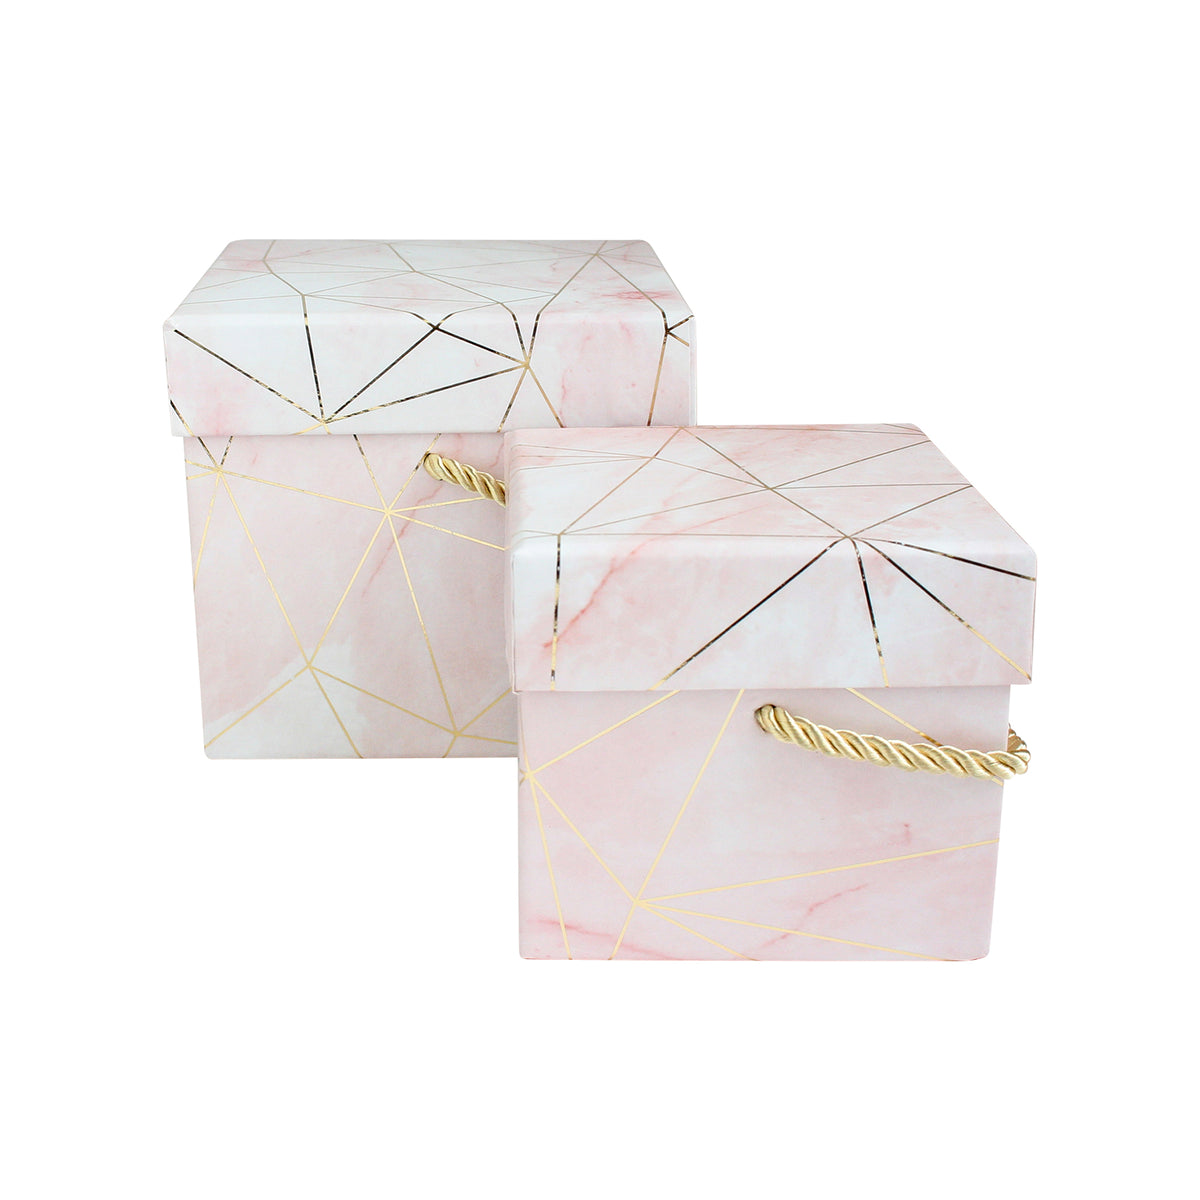 Set of 2 Pink Marble Print Gift Boxes